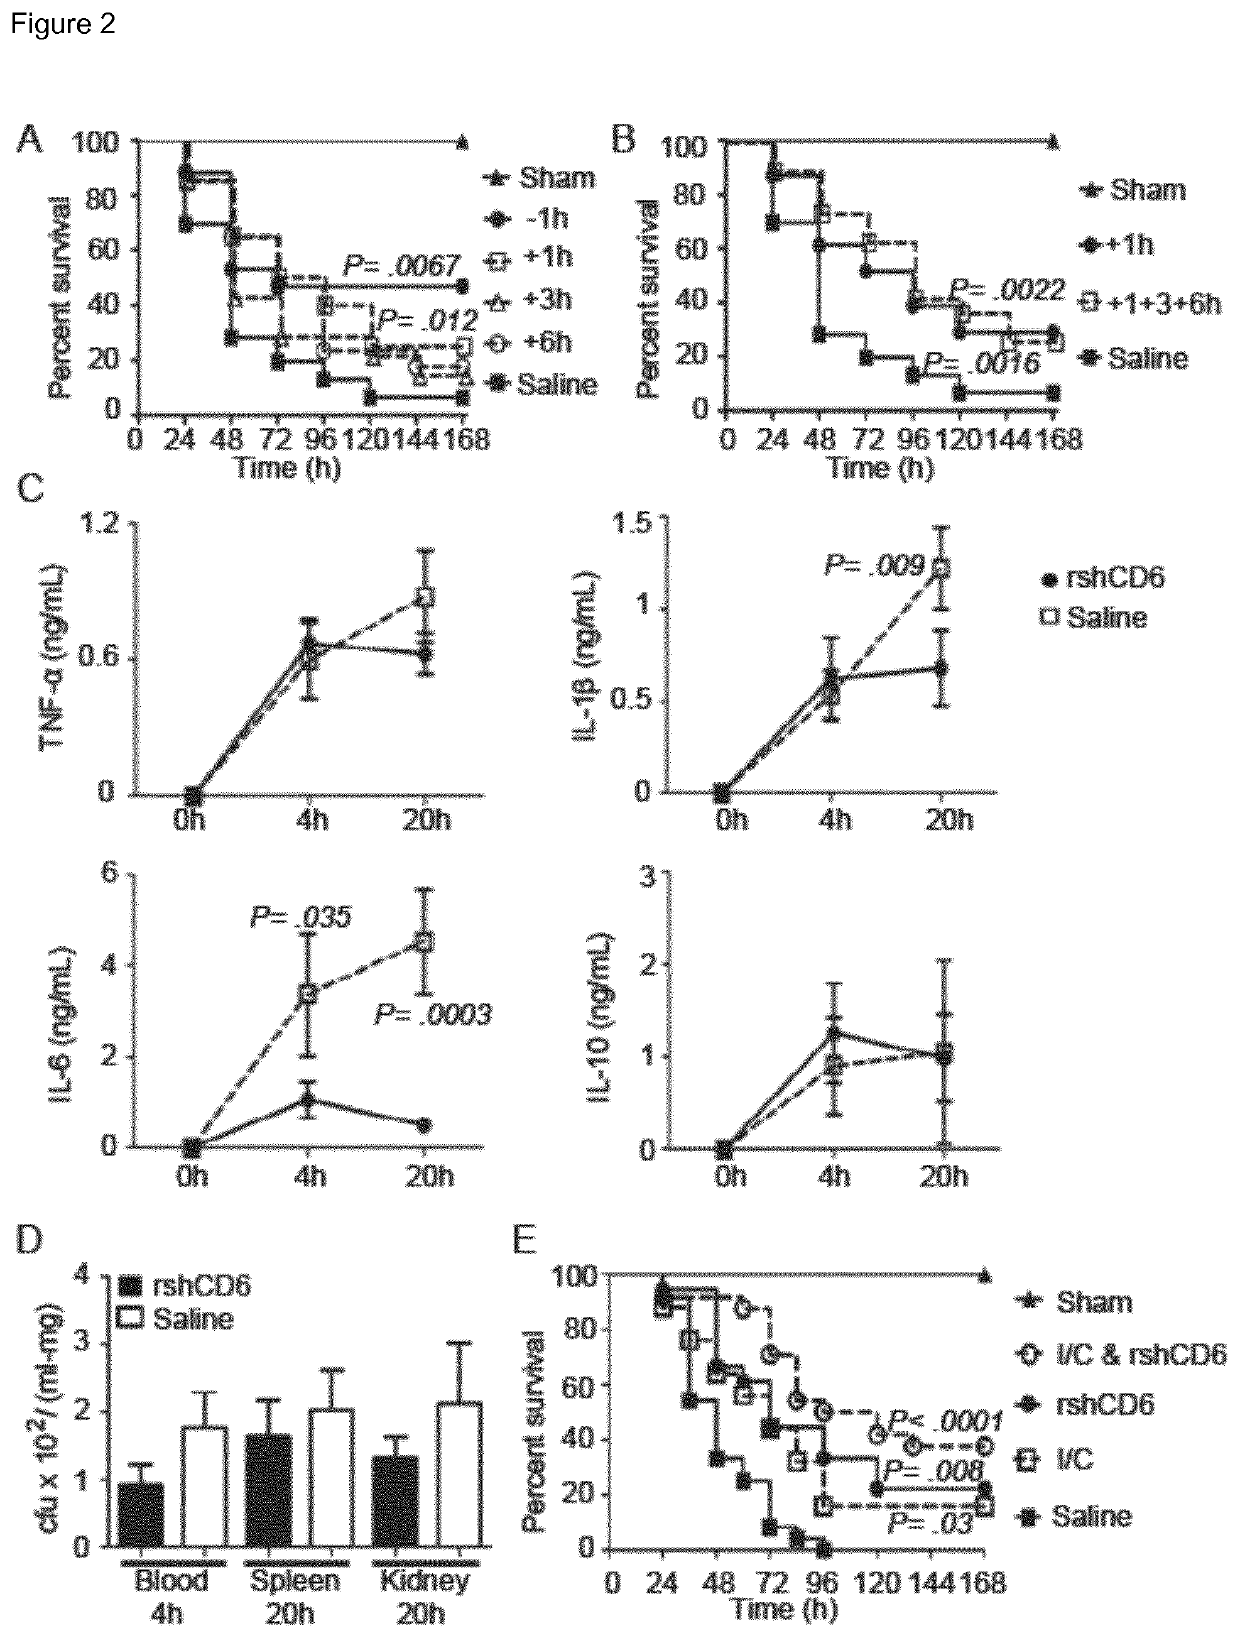 Combined cd6 and imipenem therapy for treatment of infectious diseases and related inflammatory processes